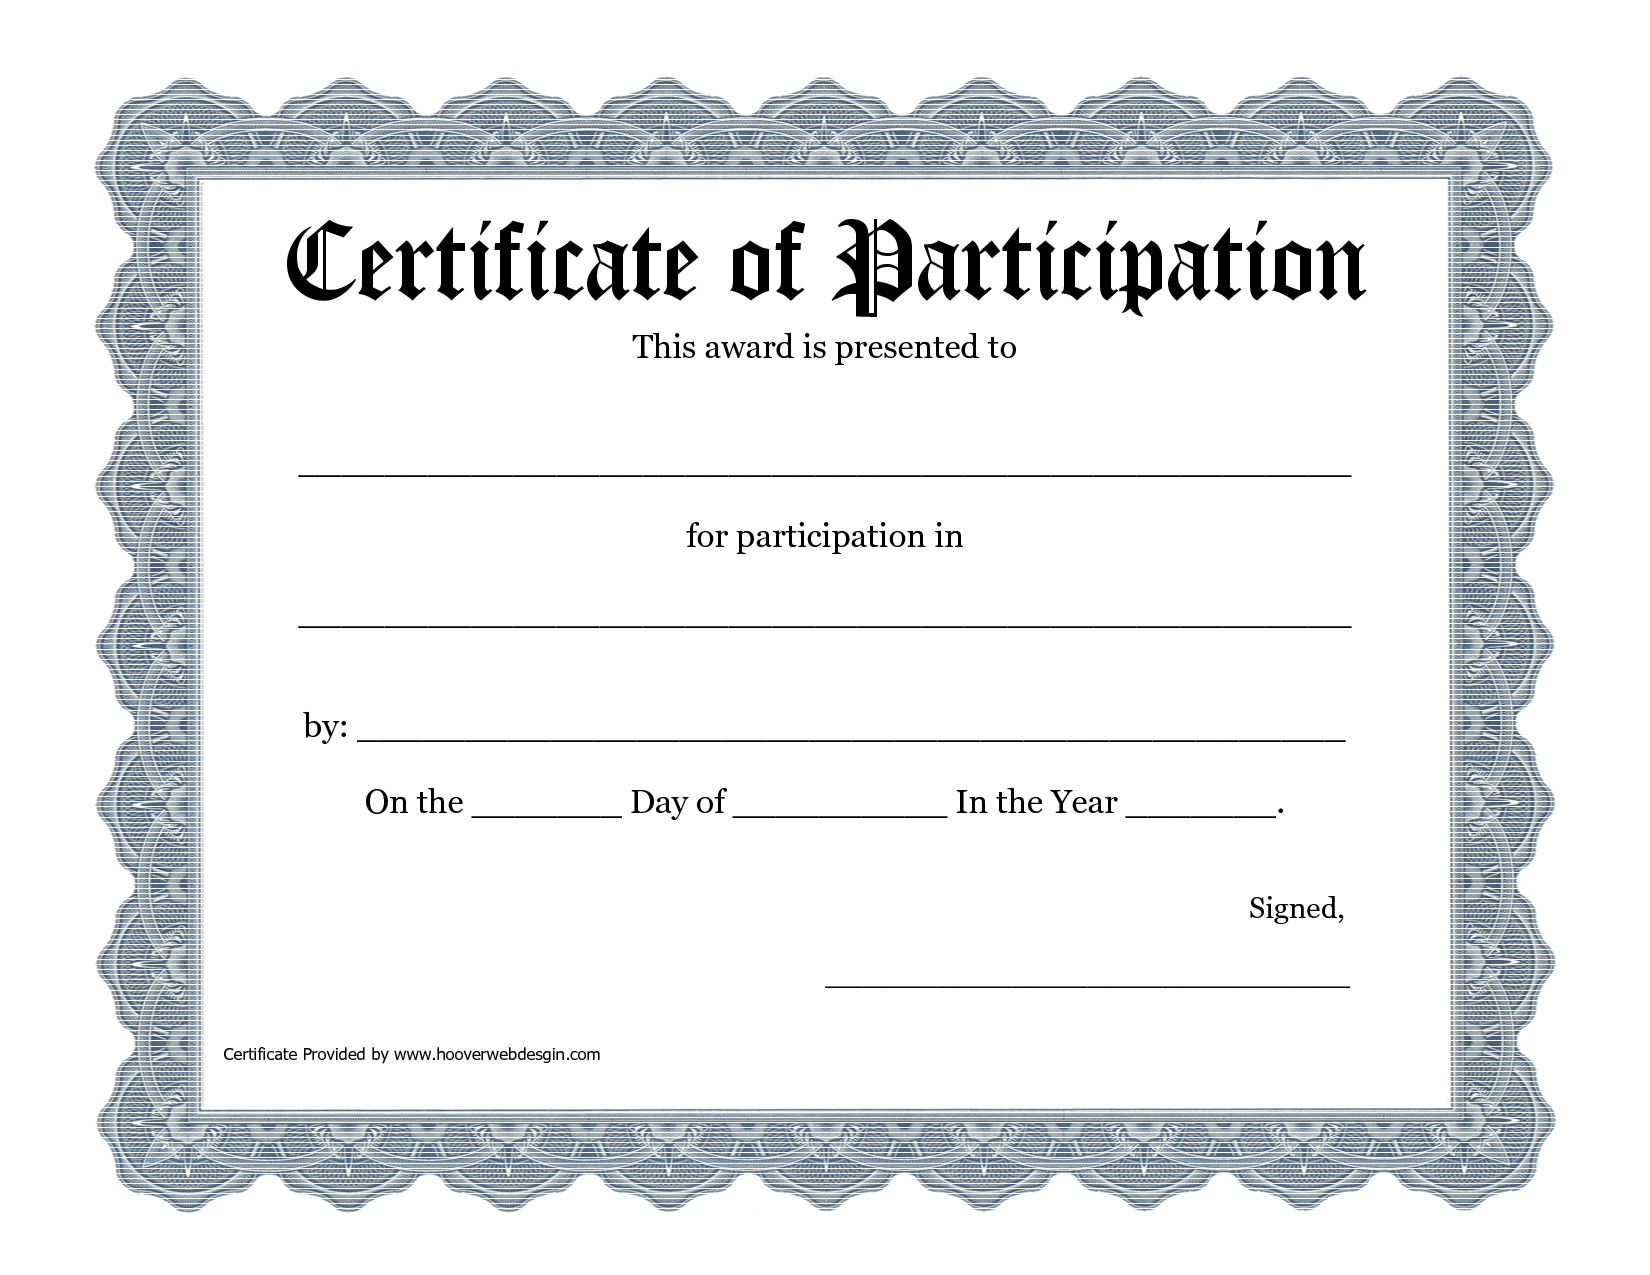 Certificate Of Participation Template Pdf For Certificate Of Participation Template Pdf